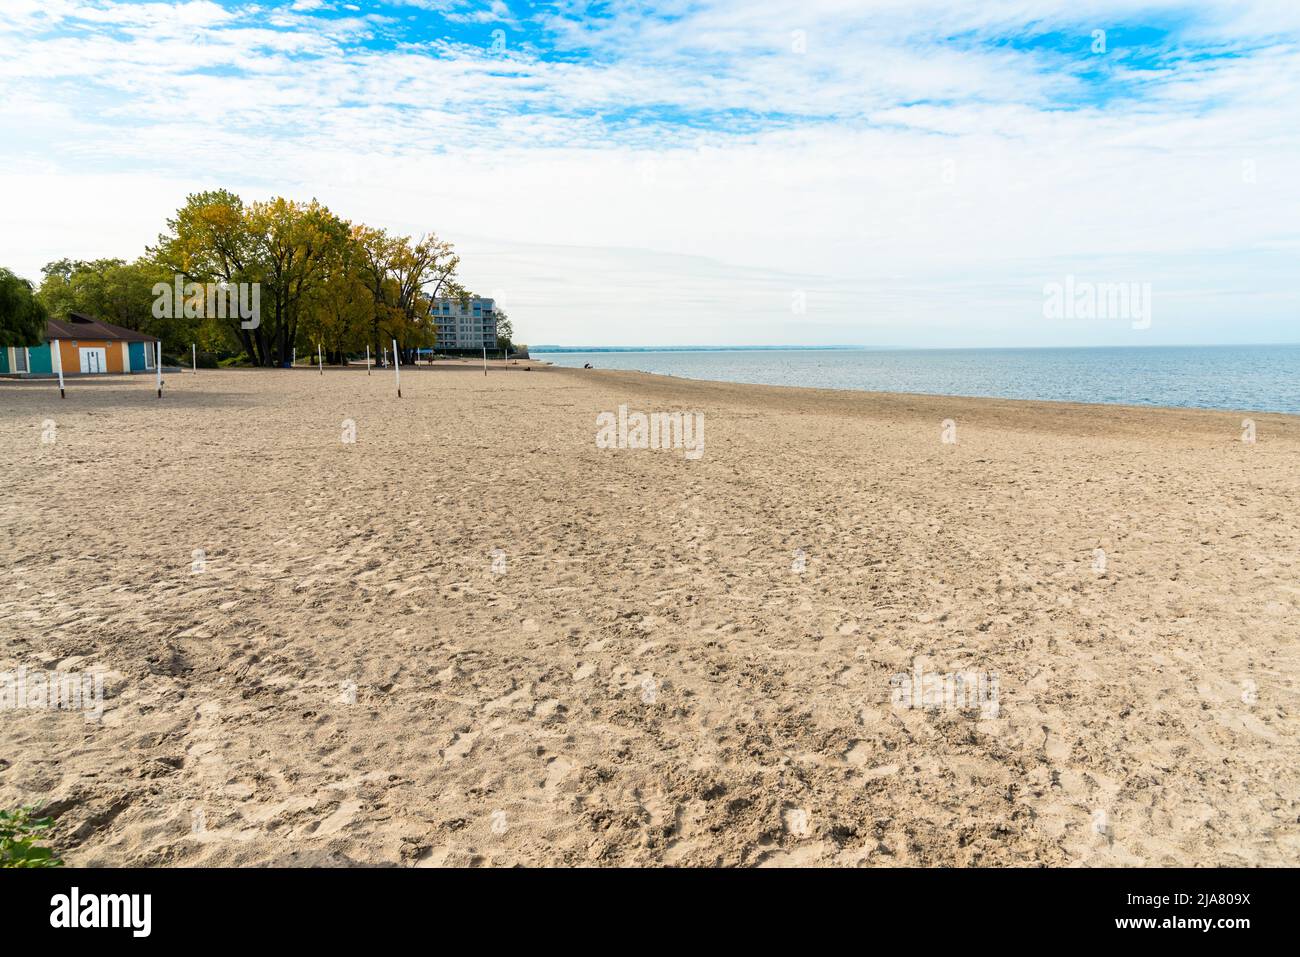 Large beach on a lake on a partly cloudy autumn day Stock Photo